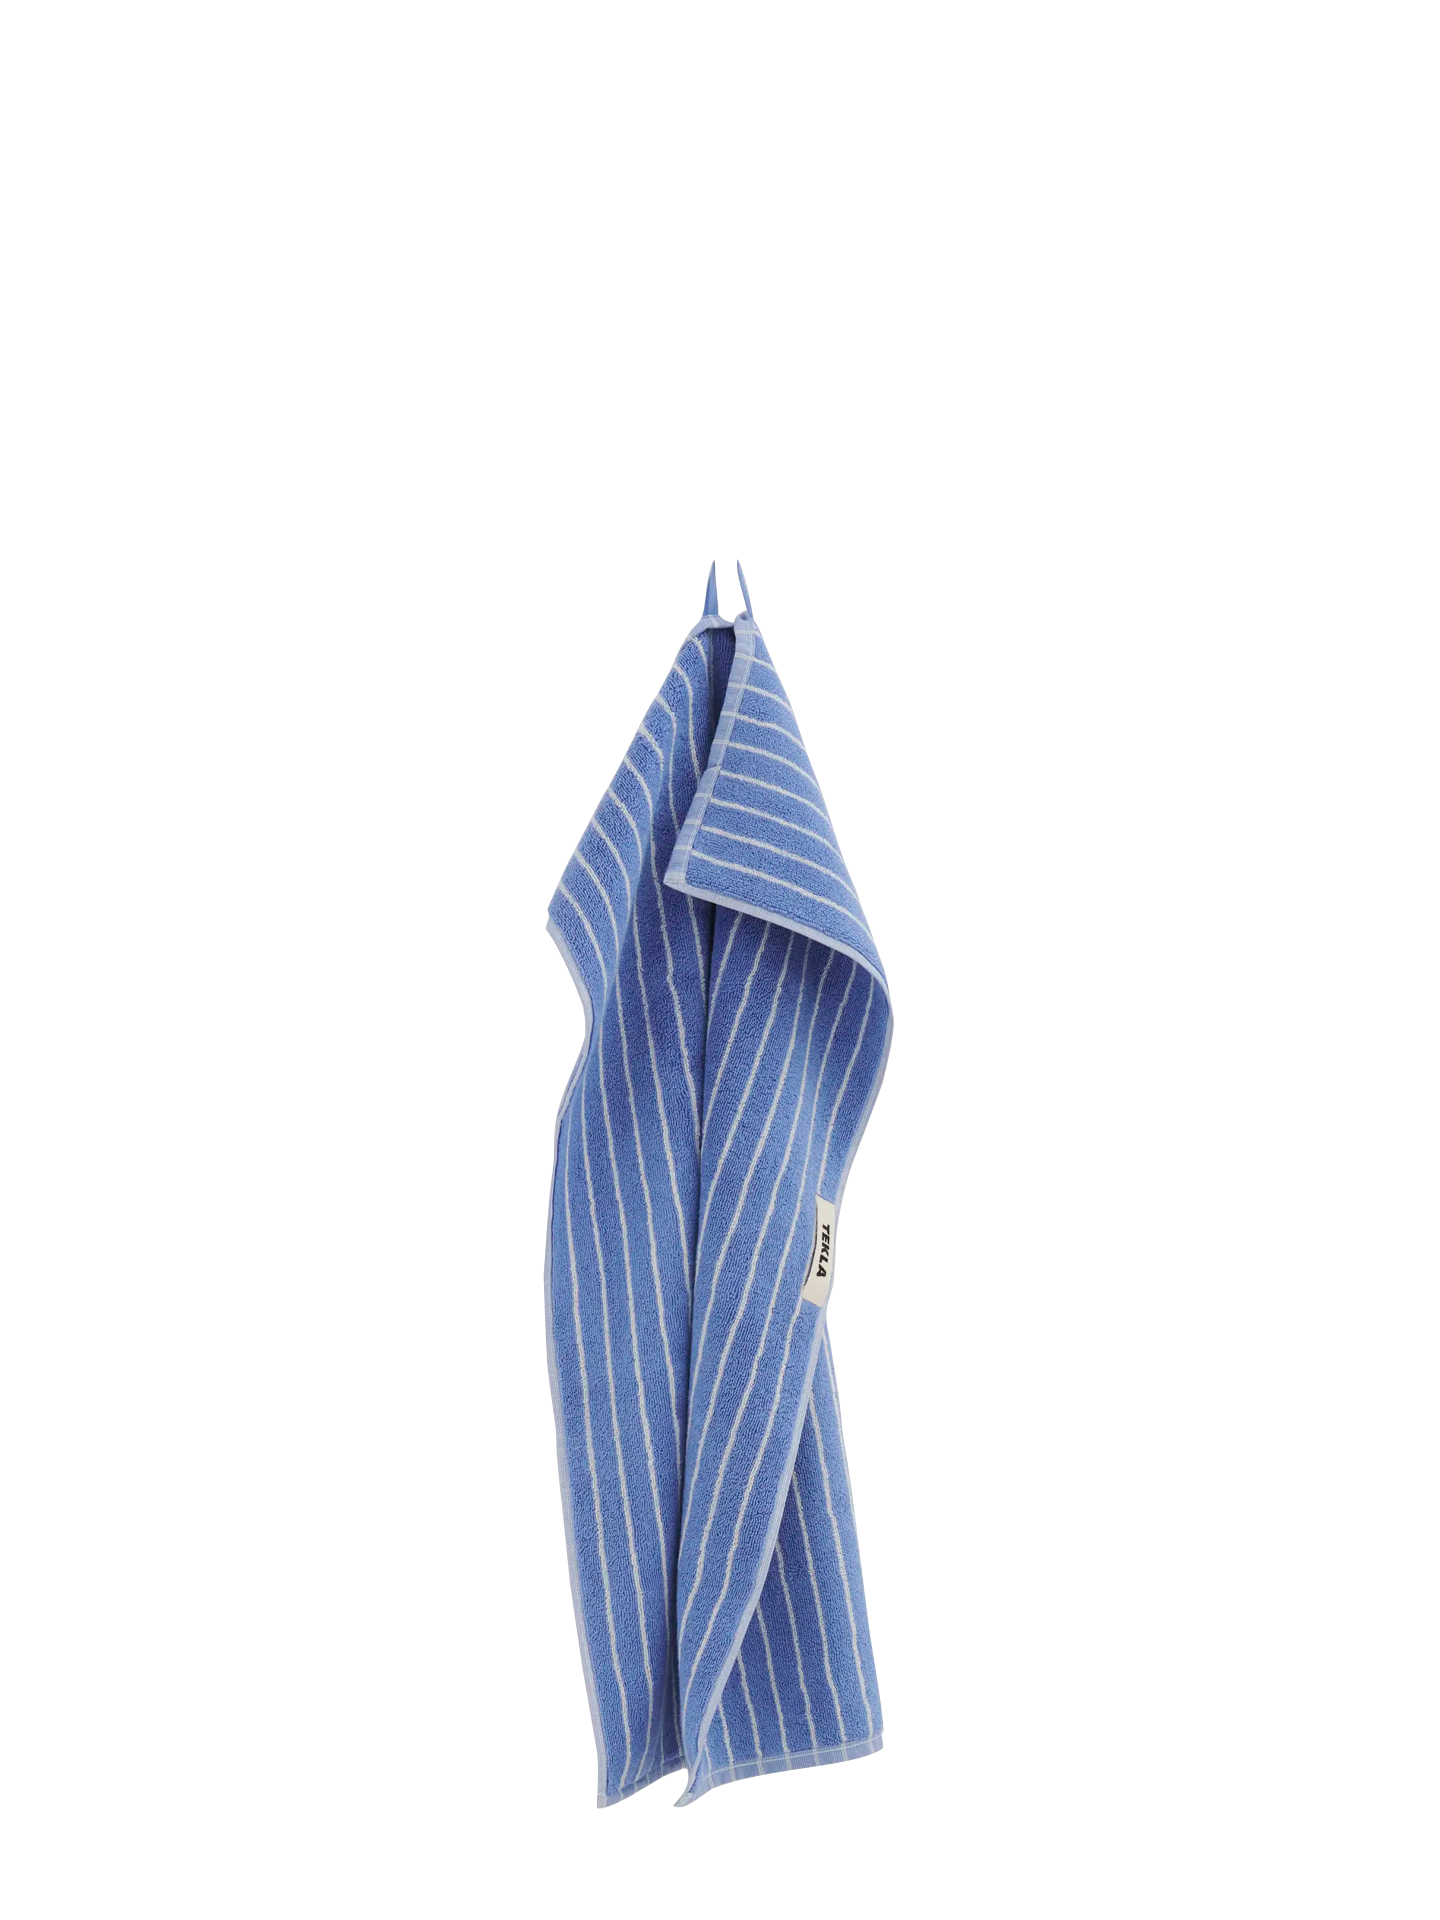 Terry Hand Towel, Clear blue stripes